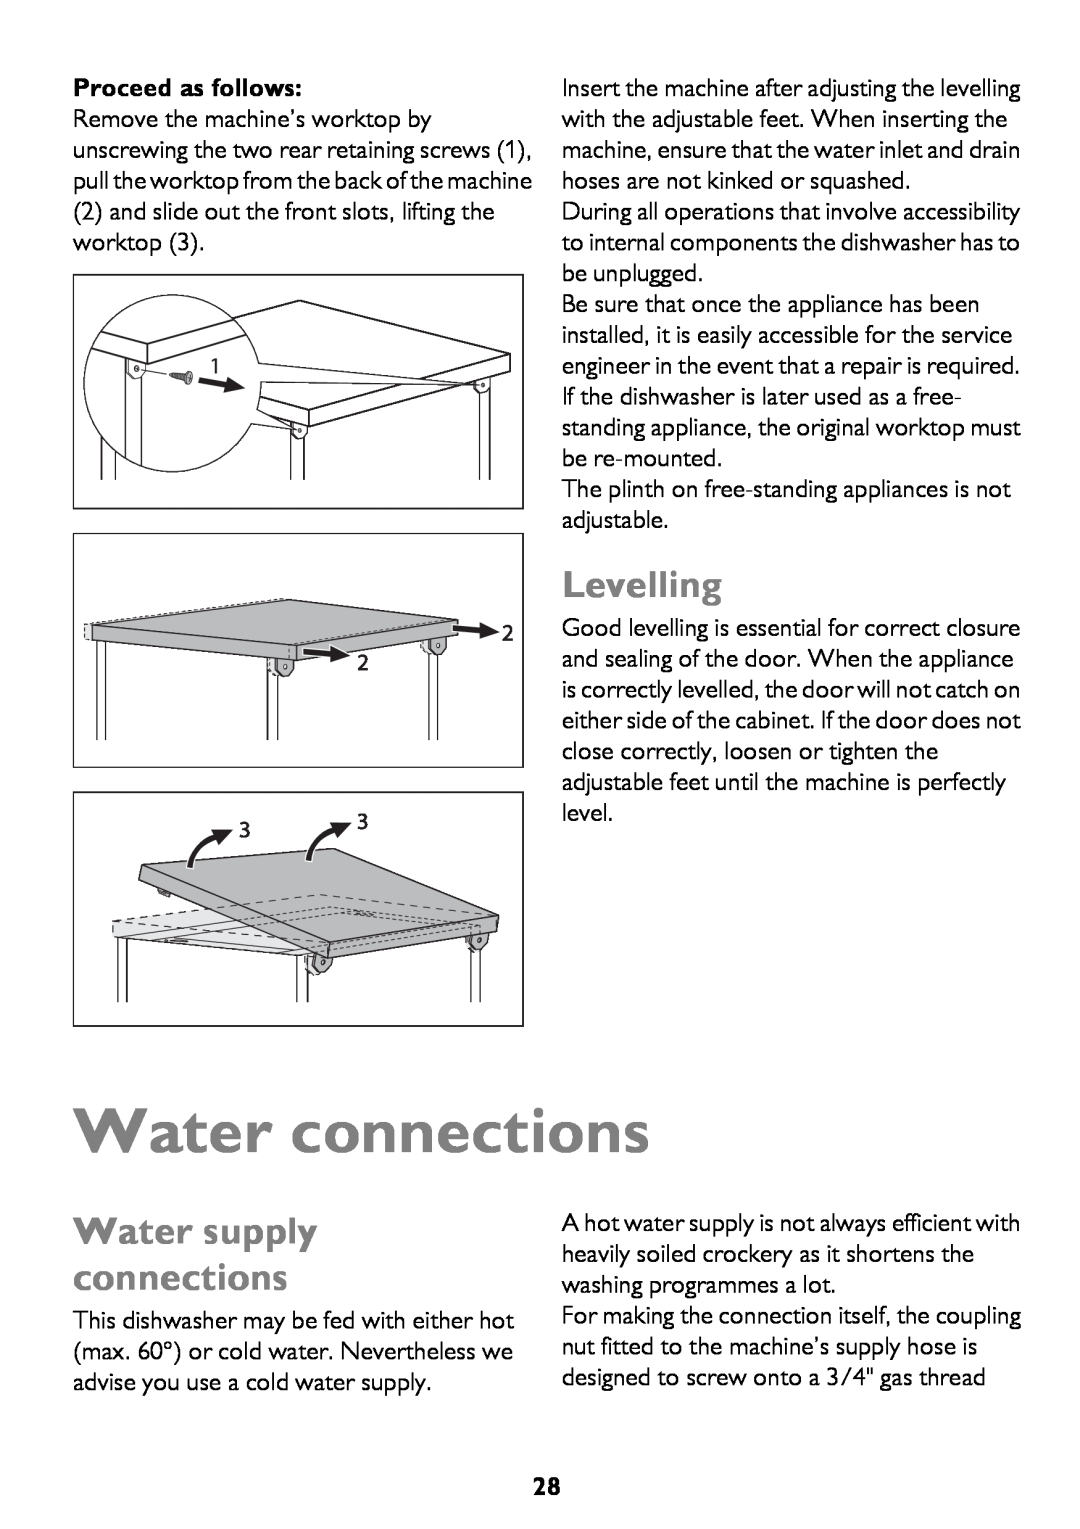 John Lewis JLDWW 1206 instruction manual Water connections, Levelling, Water supply connections, Proceed as follows 